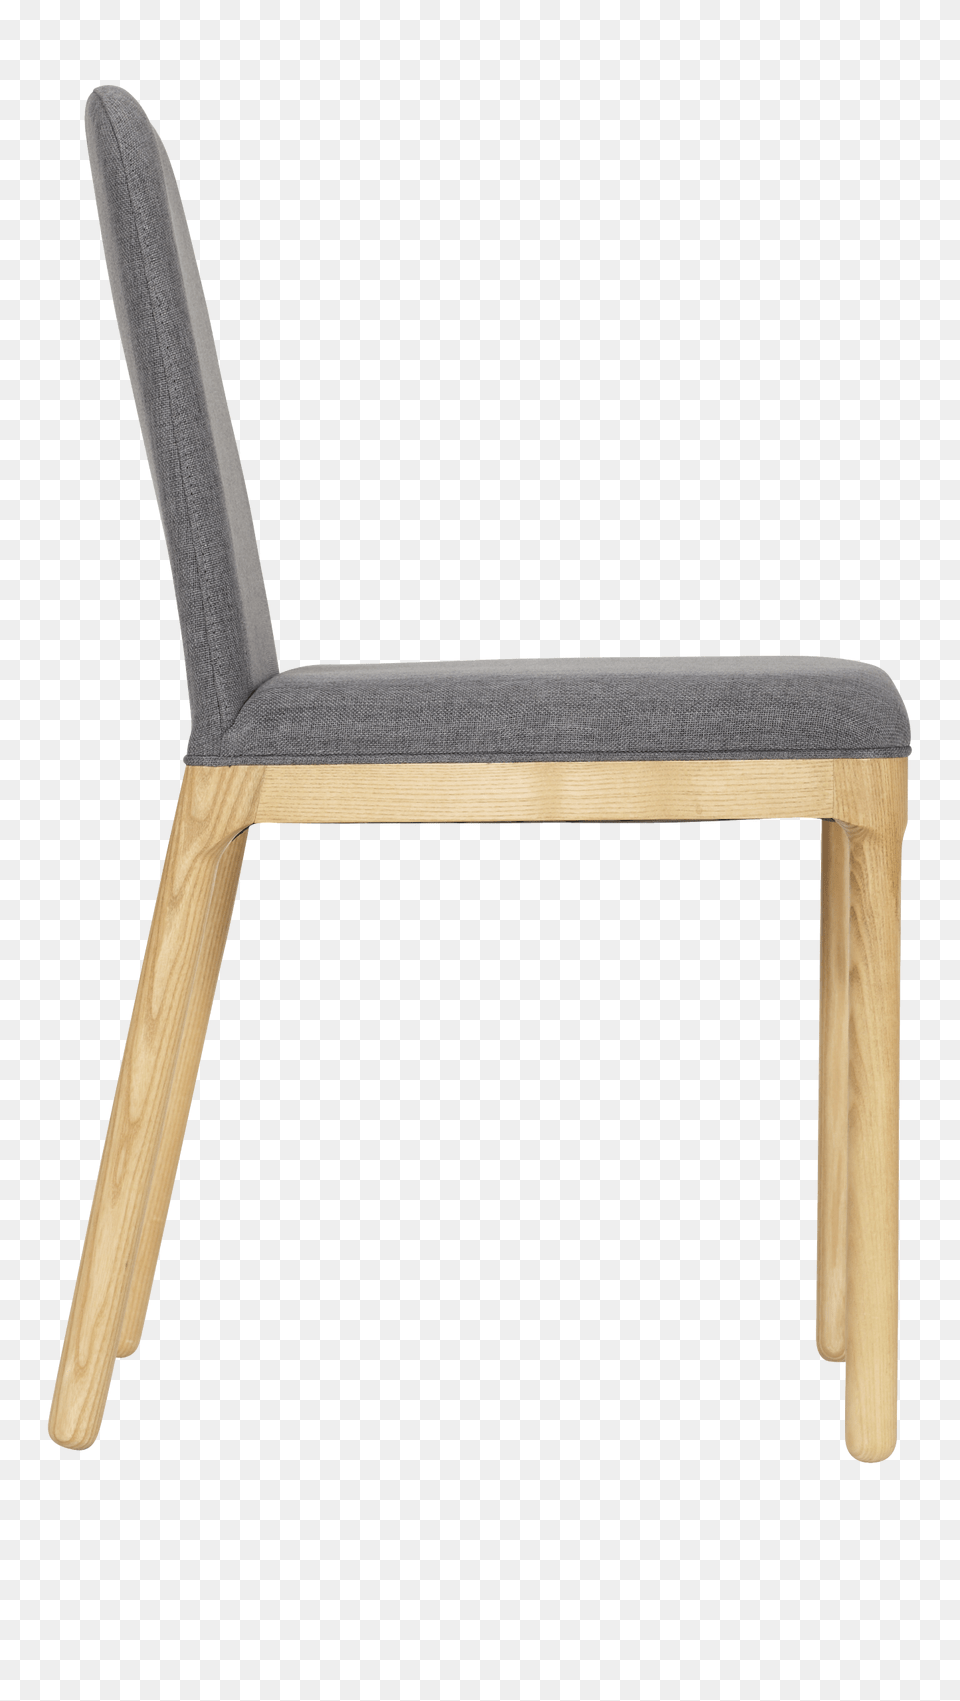 Bet Sillas De Comedor Tela Madera Furniture Design, Bench, Chair, Plywood, Wood Png Image